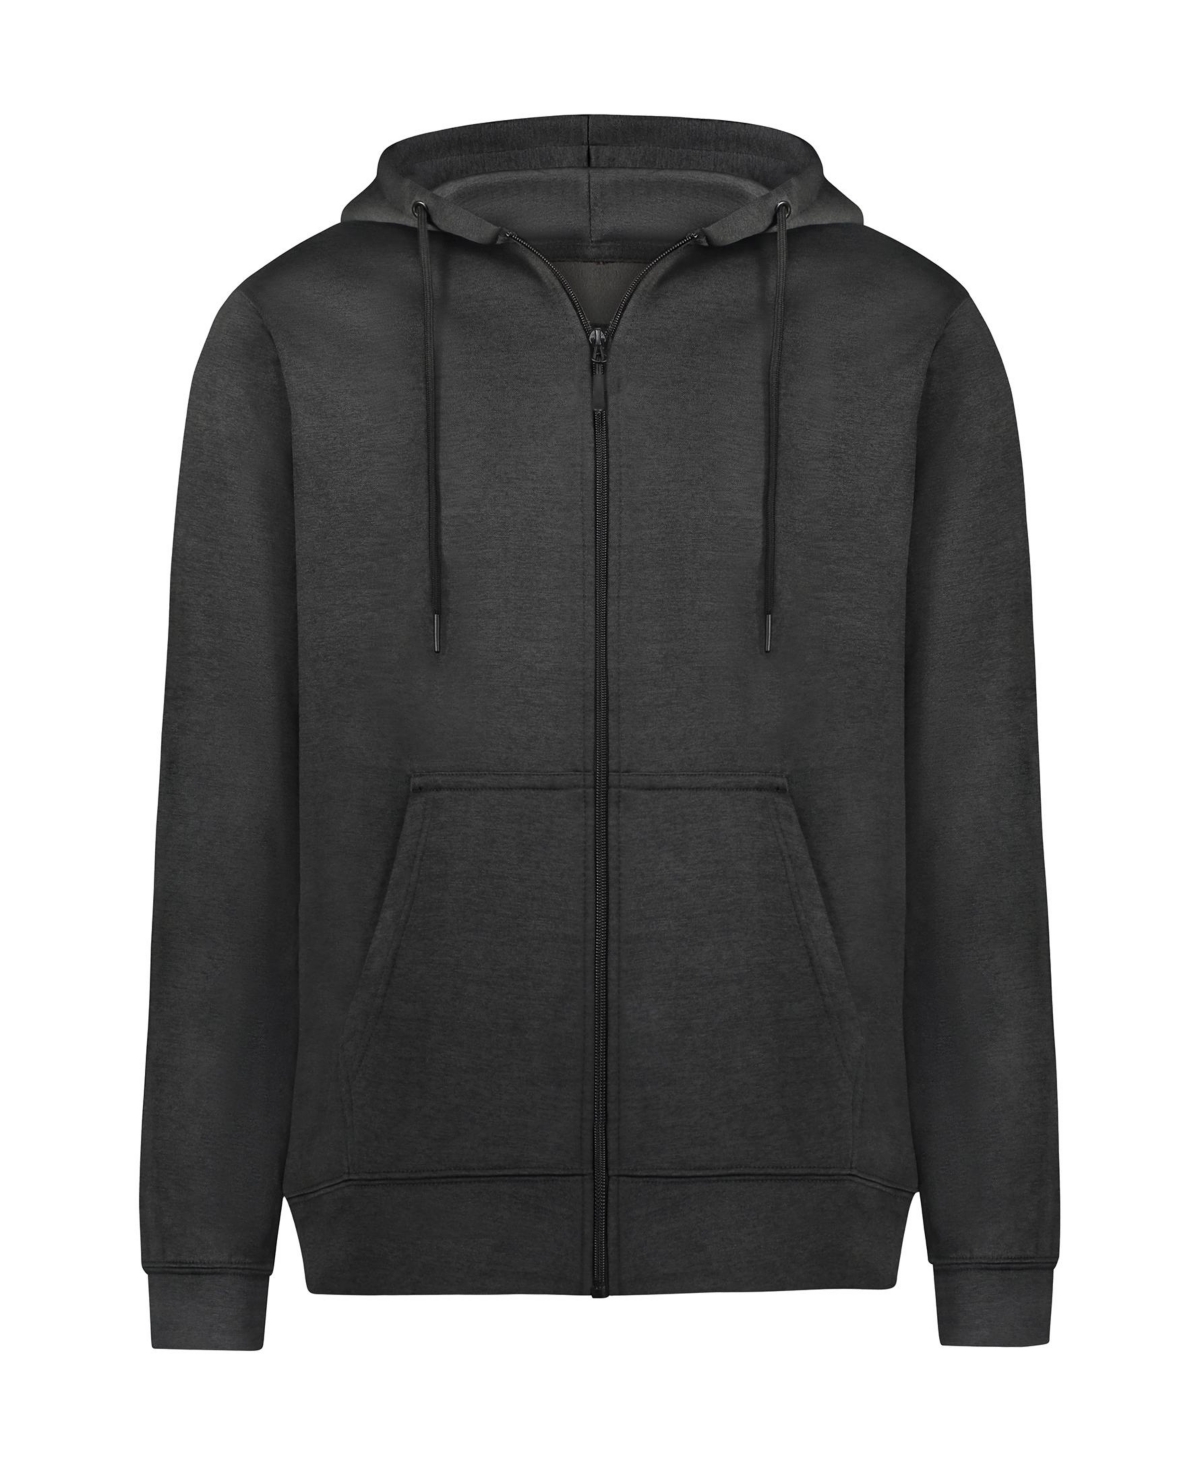 Premium Zip-Up Hoodie for Women with Smooth Matte Finish & Cozy Fleece Inner Lining - Women's Sweater with Hood - Sunset red